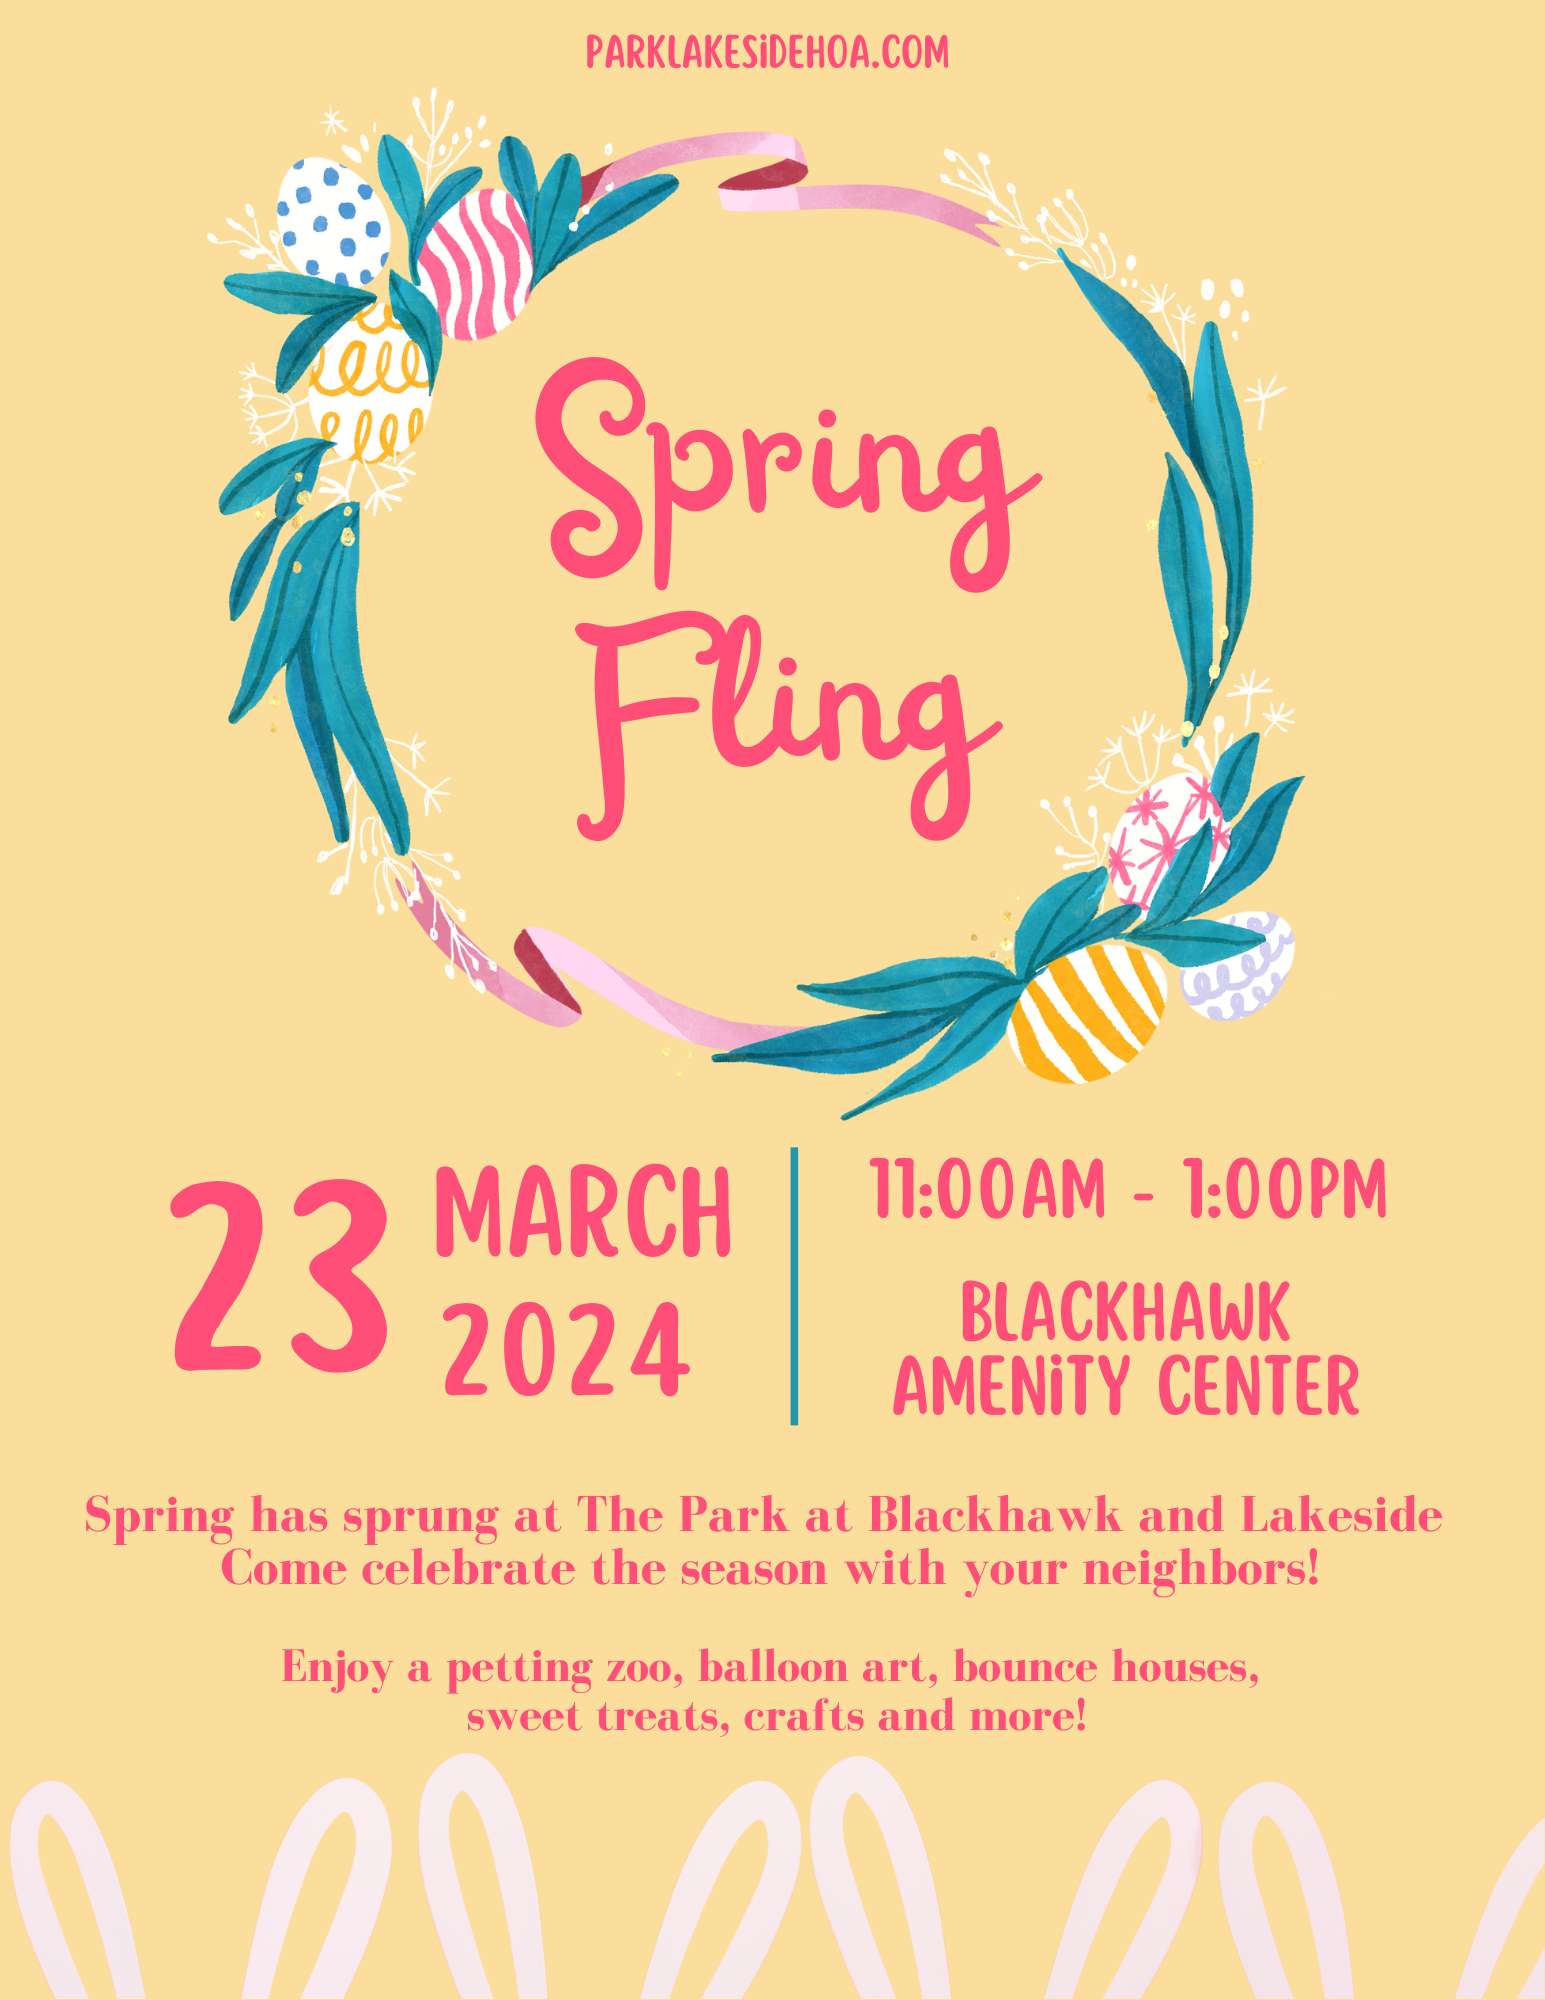 A vibrant flyer announcing the 'Spring Fling' event on March 23, 2024, from 11:00 am to 1:00 pm at the Blackhawk Amenity Center. The flyer is dominated by a spring-themed color palette with a yellow background and features illustrations of eggs and plants forming a wreath around the words 'Spring Fling'. The website parklakesidehoa.com is mentioned at the top.